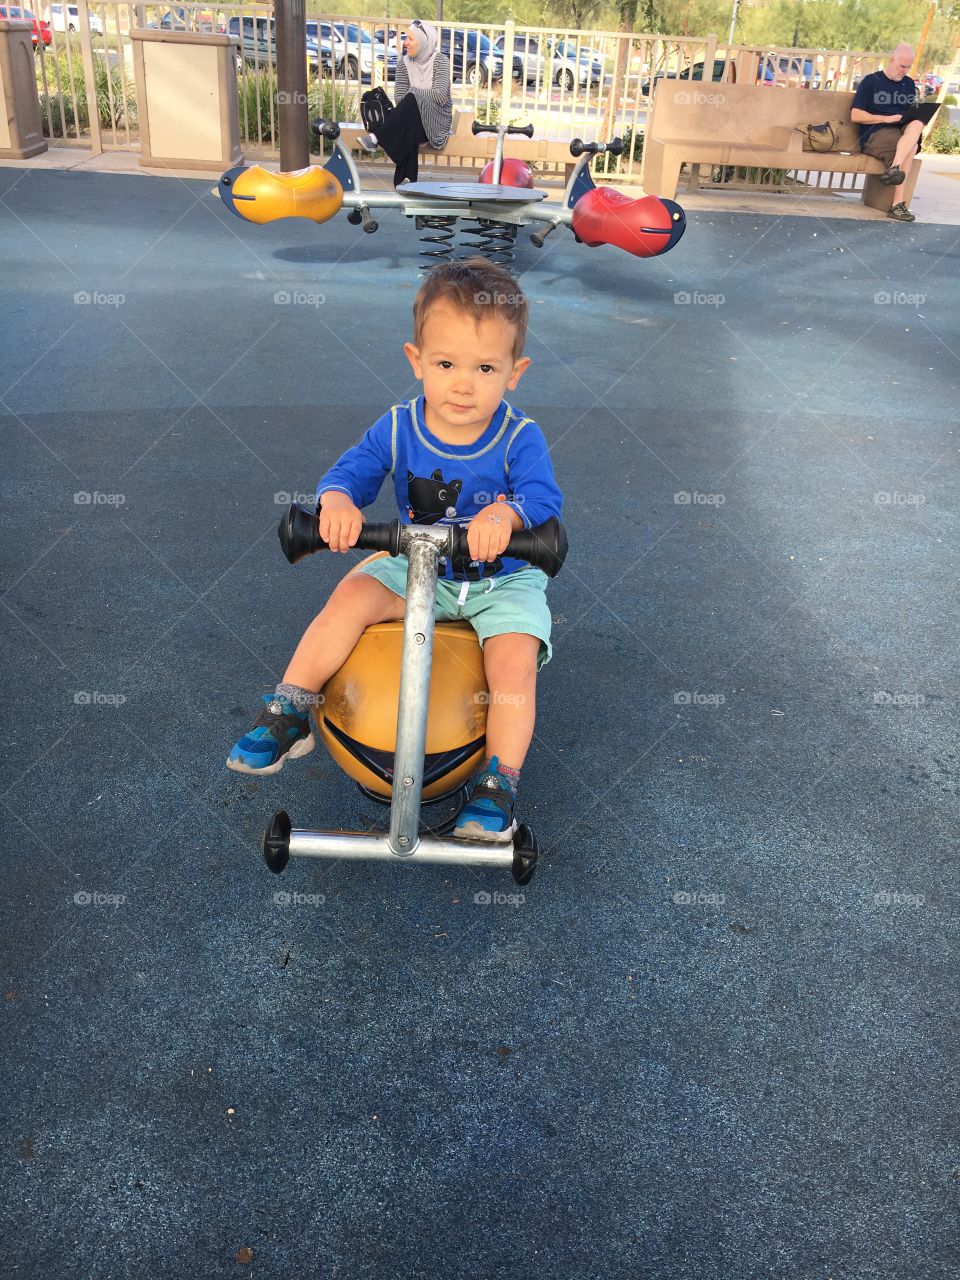 Cute toddler in blue shirt playing at the park